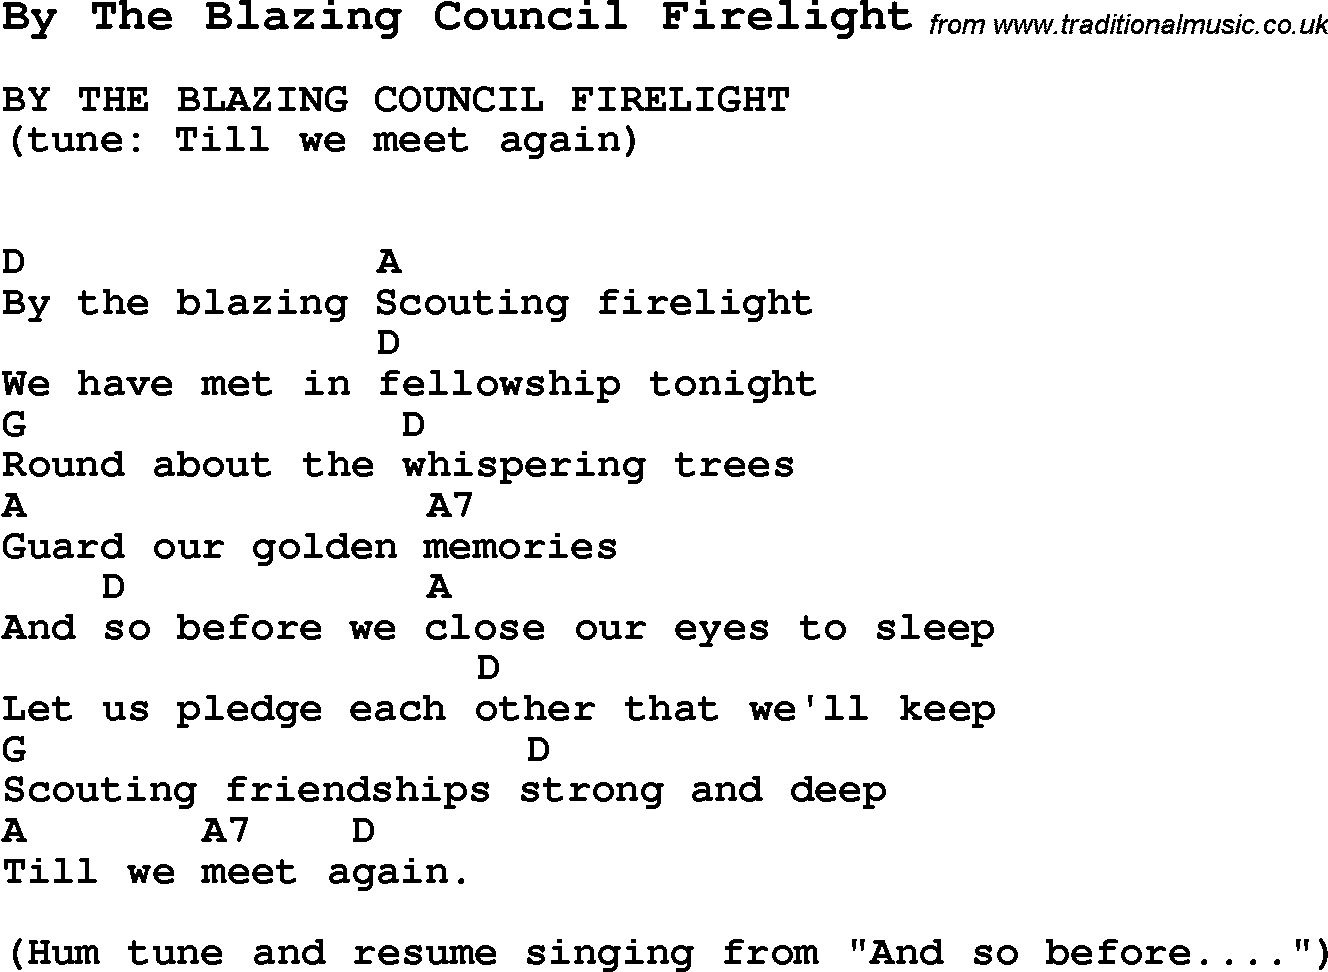 Summer-Camp Song, By The Blazing Council Firelight, with lyrics and chords for Ukulele, Guitar Banjo etc.